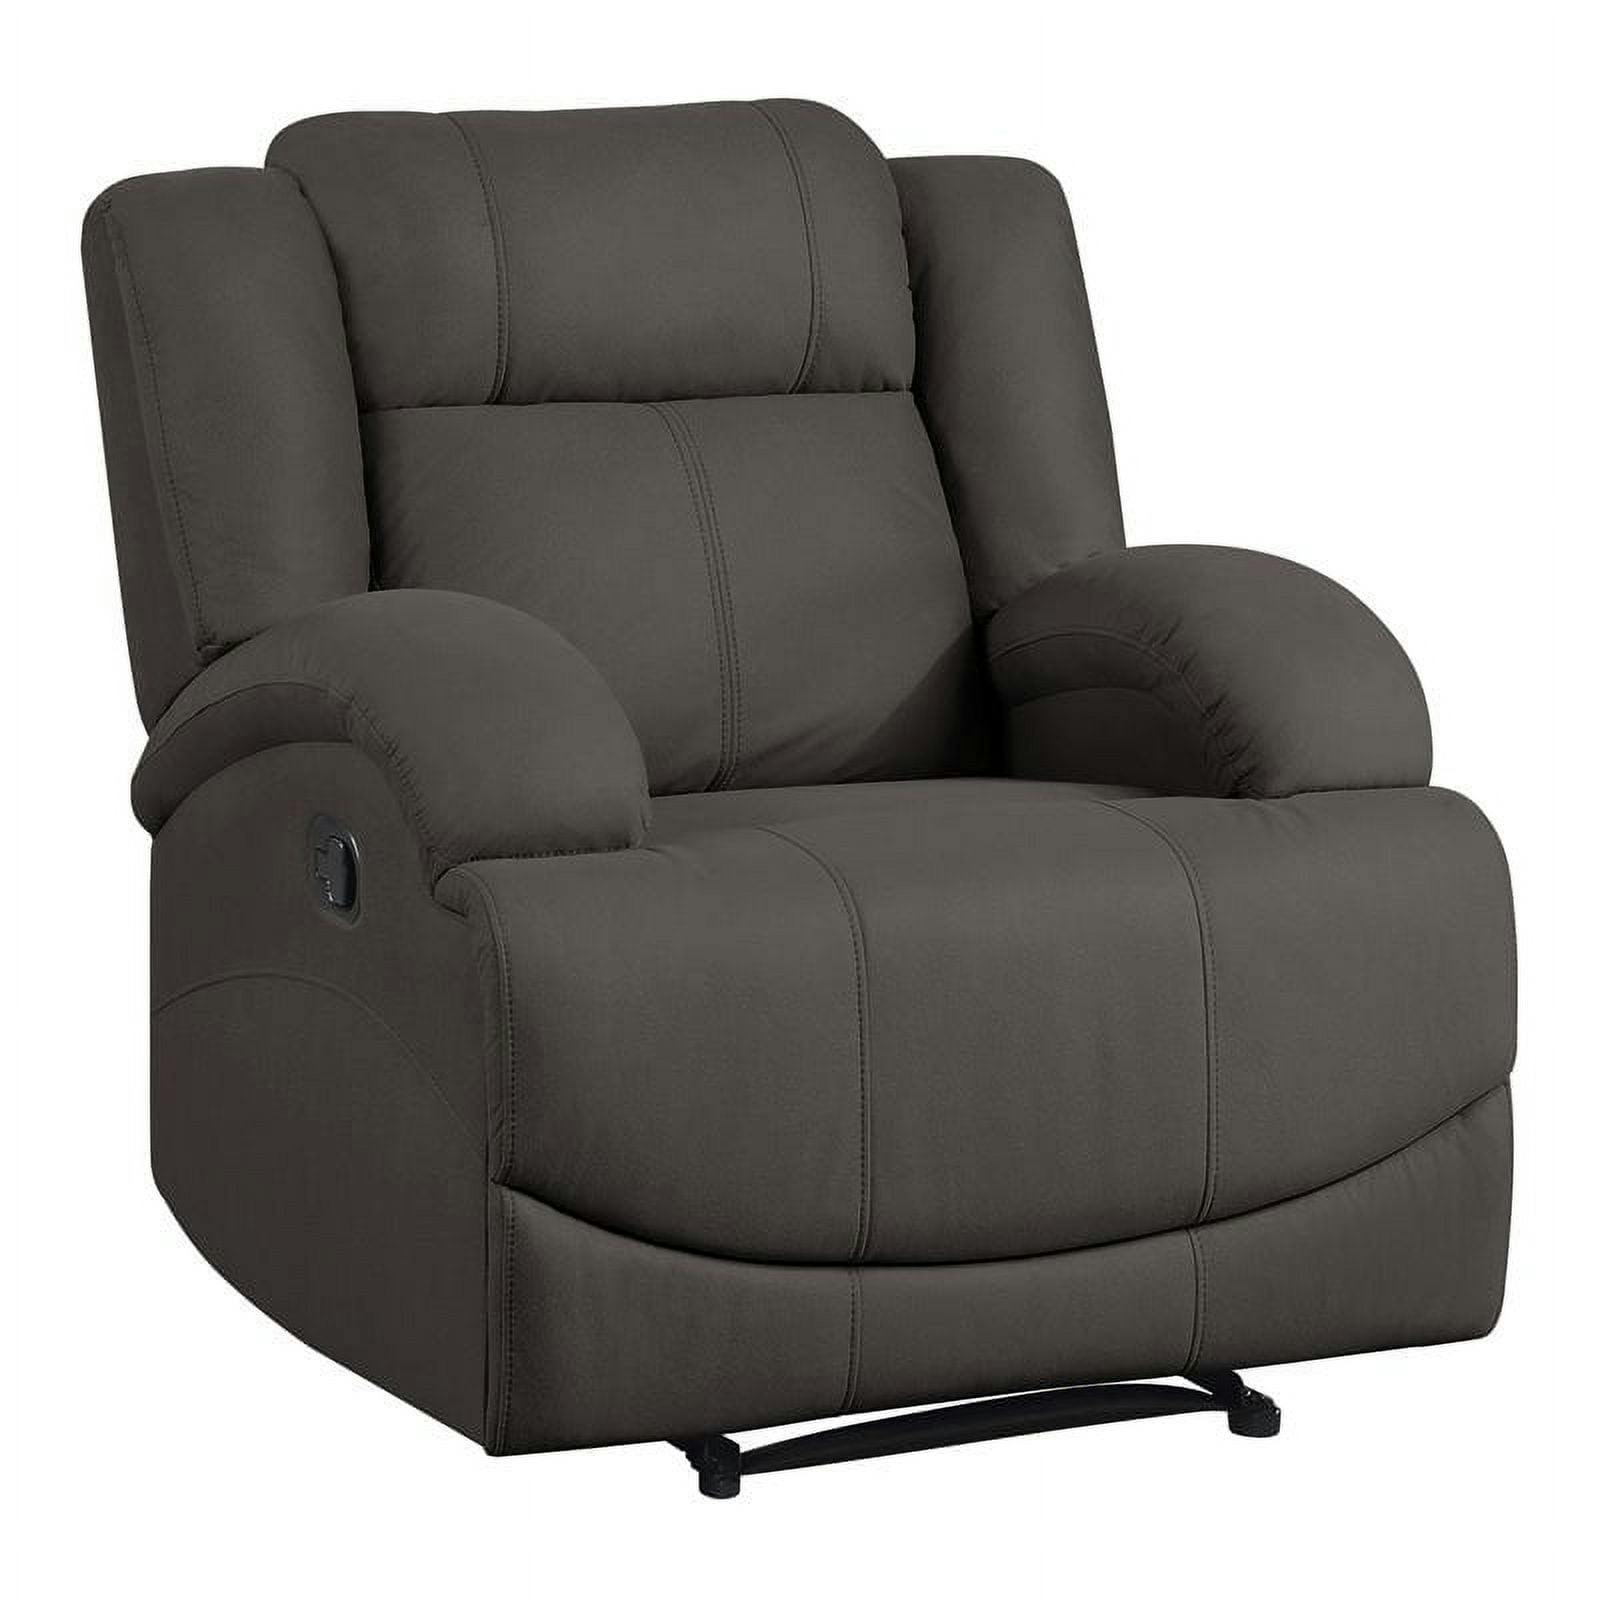 Chocolate Microfiber Manual Recliner with Coil Spring Seating